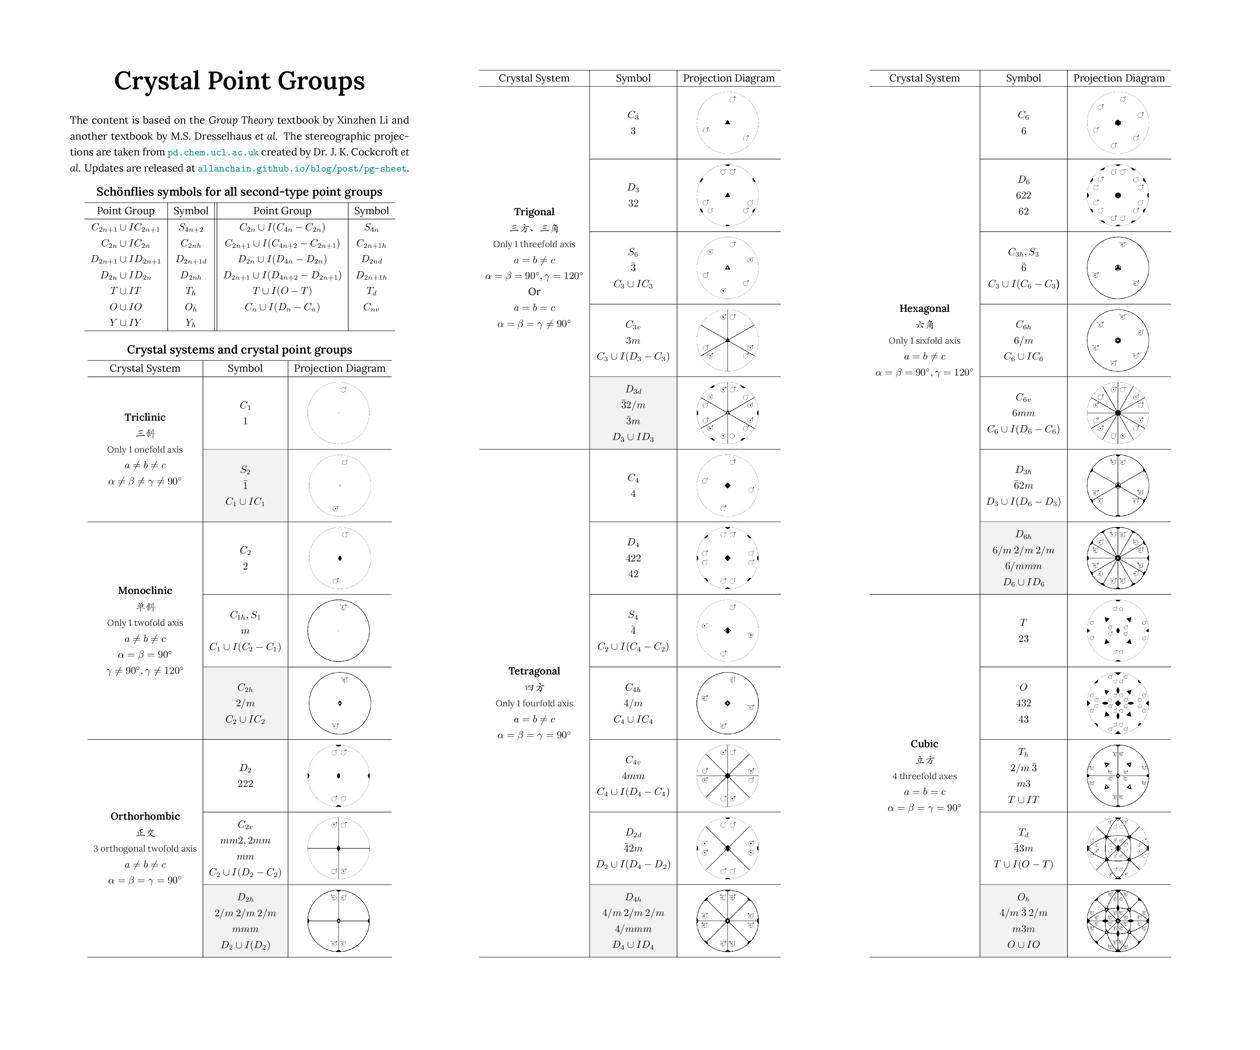 Low resolution table of crystal point groups